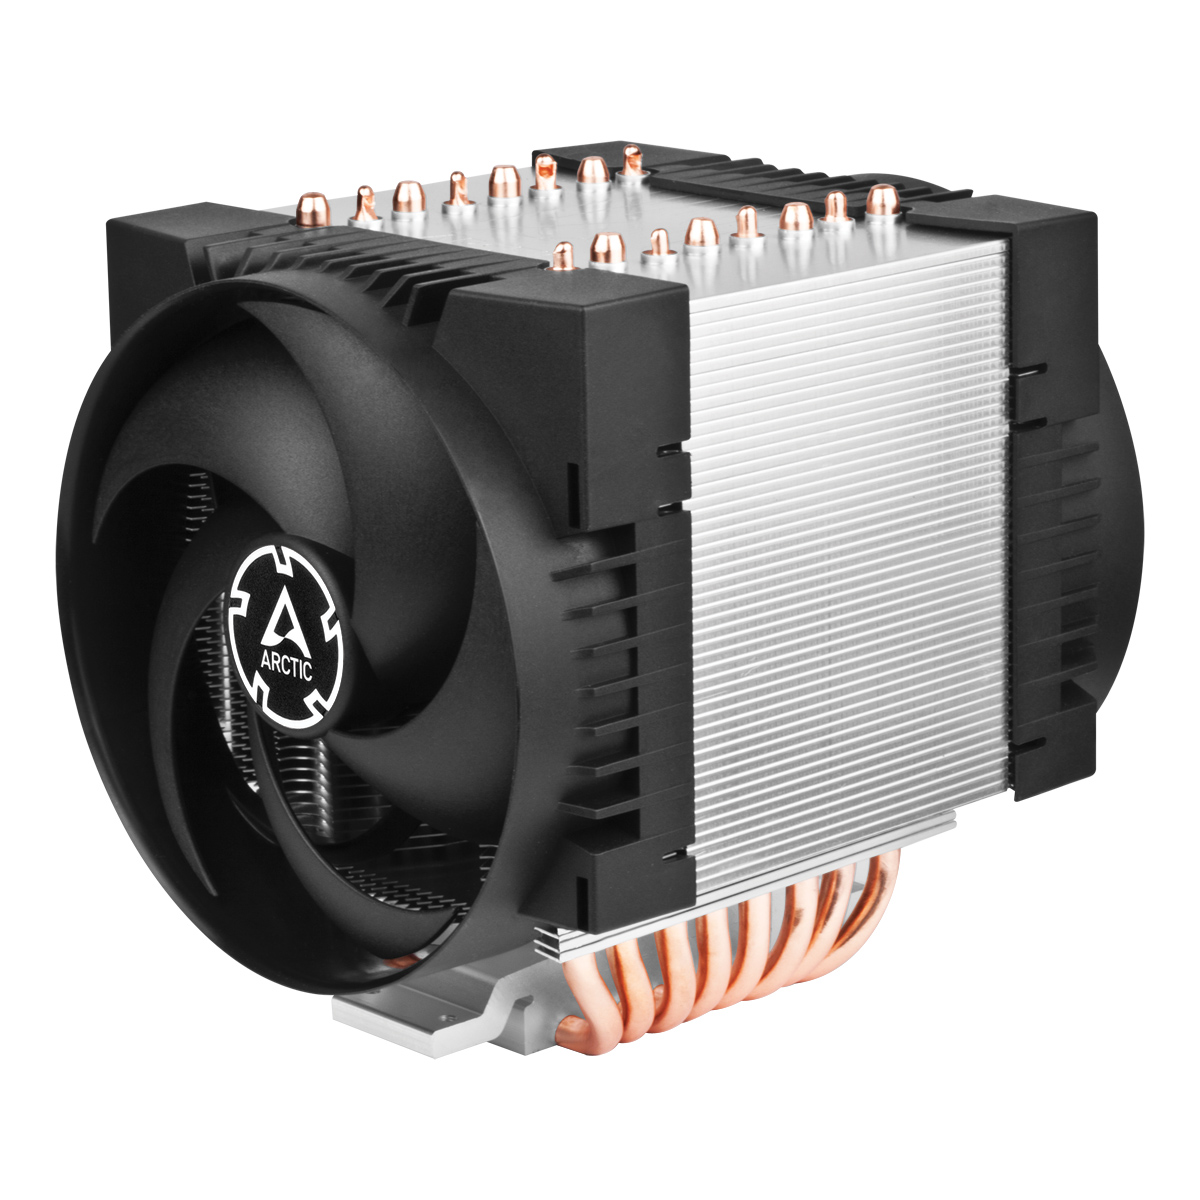 ARCTIC Freezer 4U-M - CPU Cooler for AMD socket SP3, Intel 4189/ 4677, direct touch technology, compa